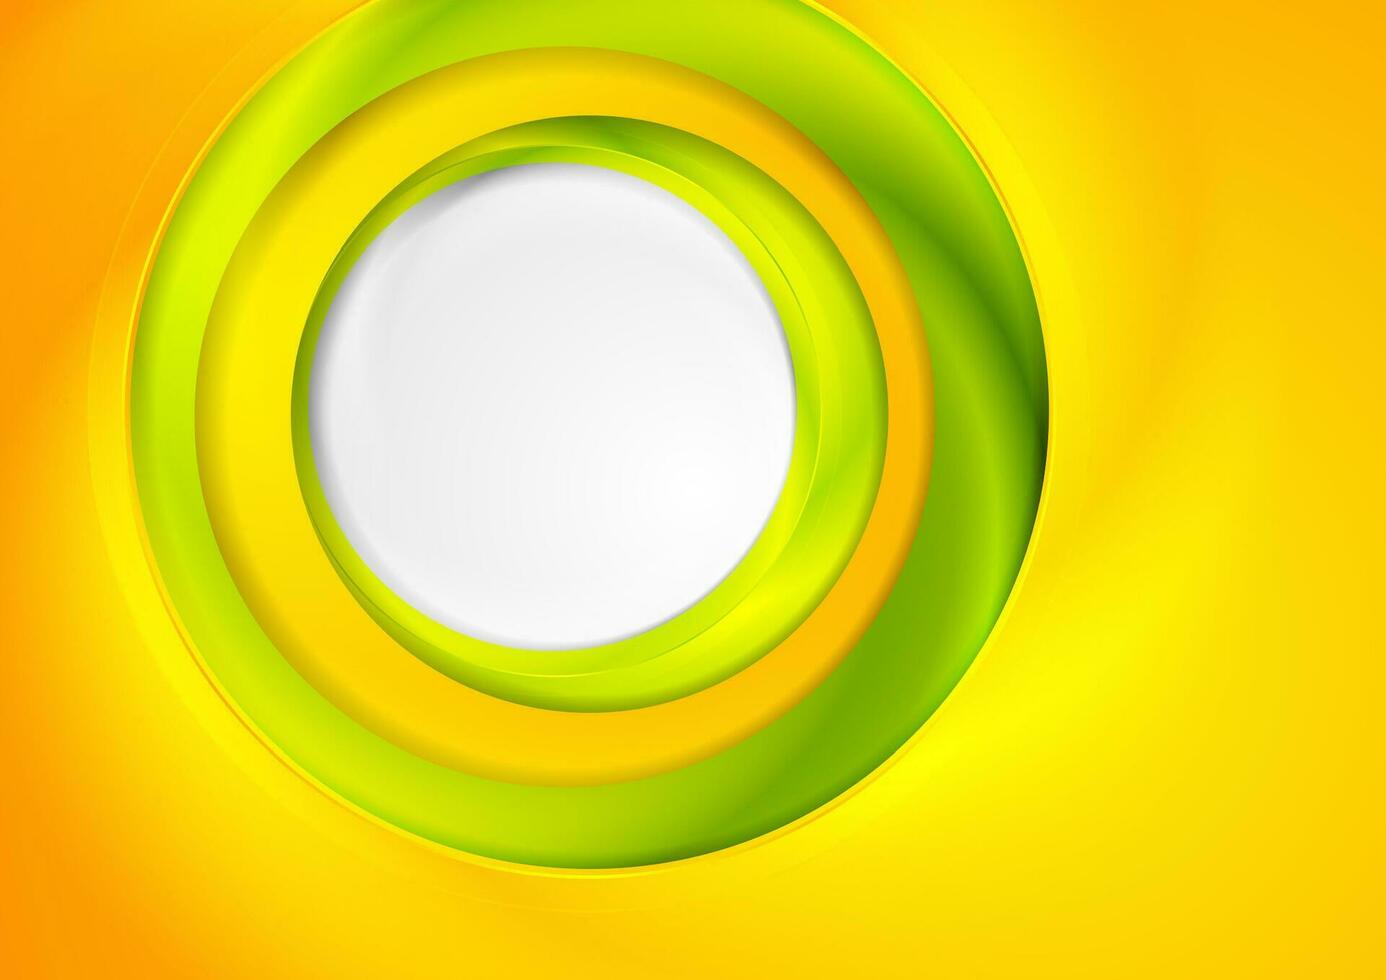 Bright abstract corporate background with circles vector